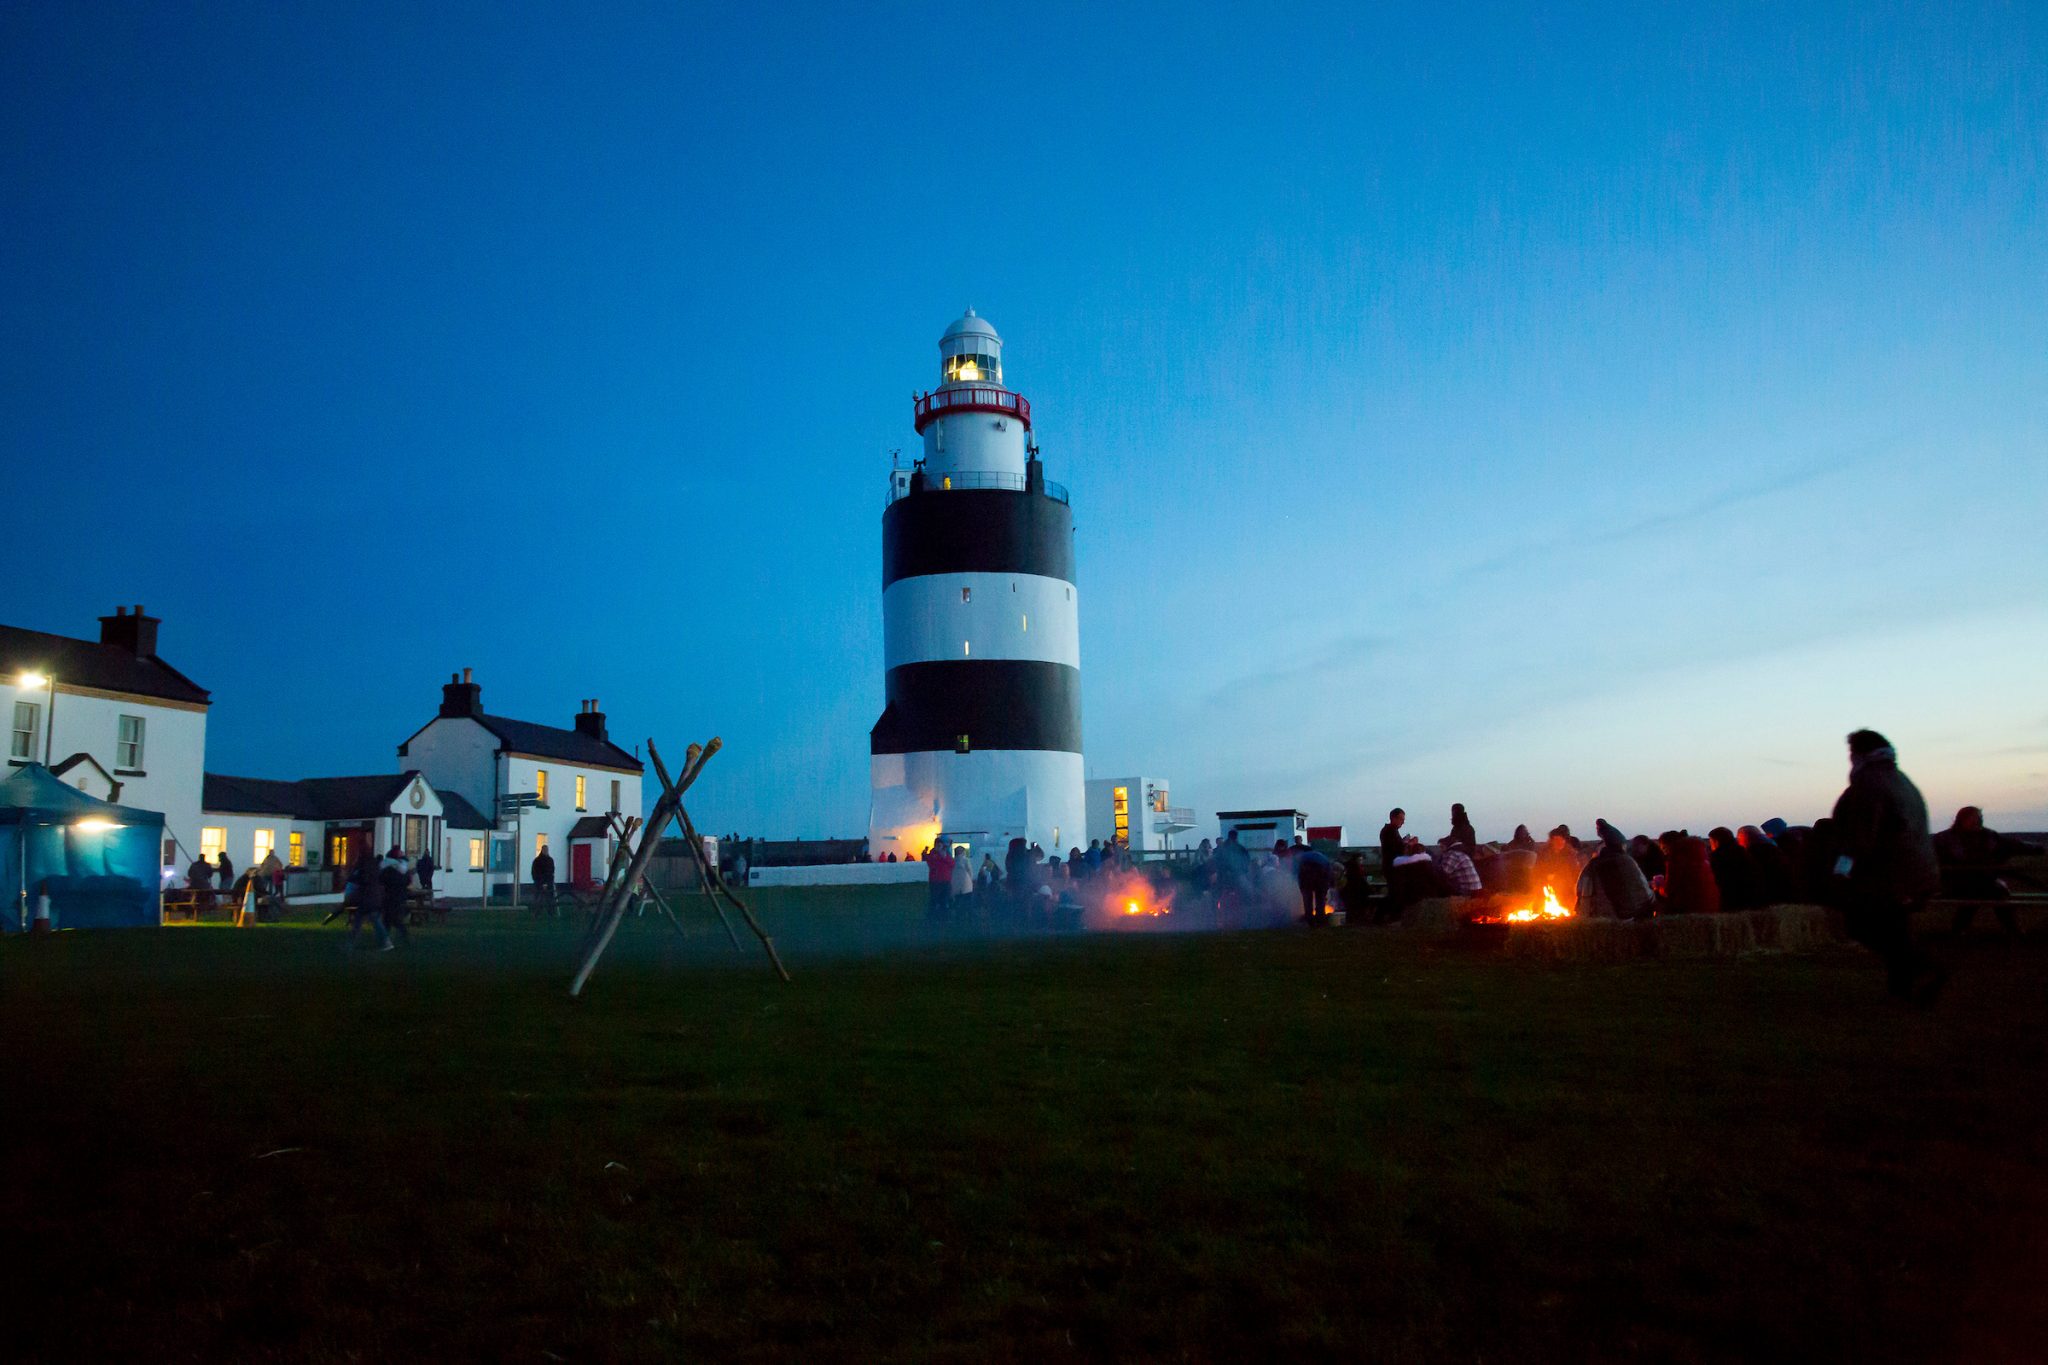 Your kids can explore Halloween’s ancient origins at Wexford’s Samhain festival